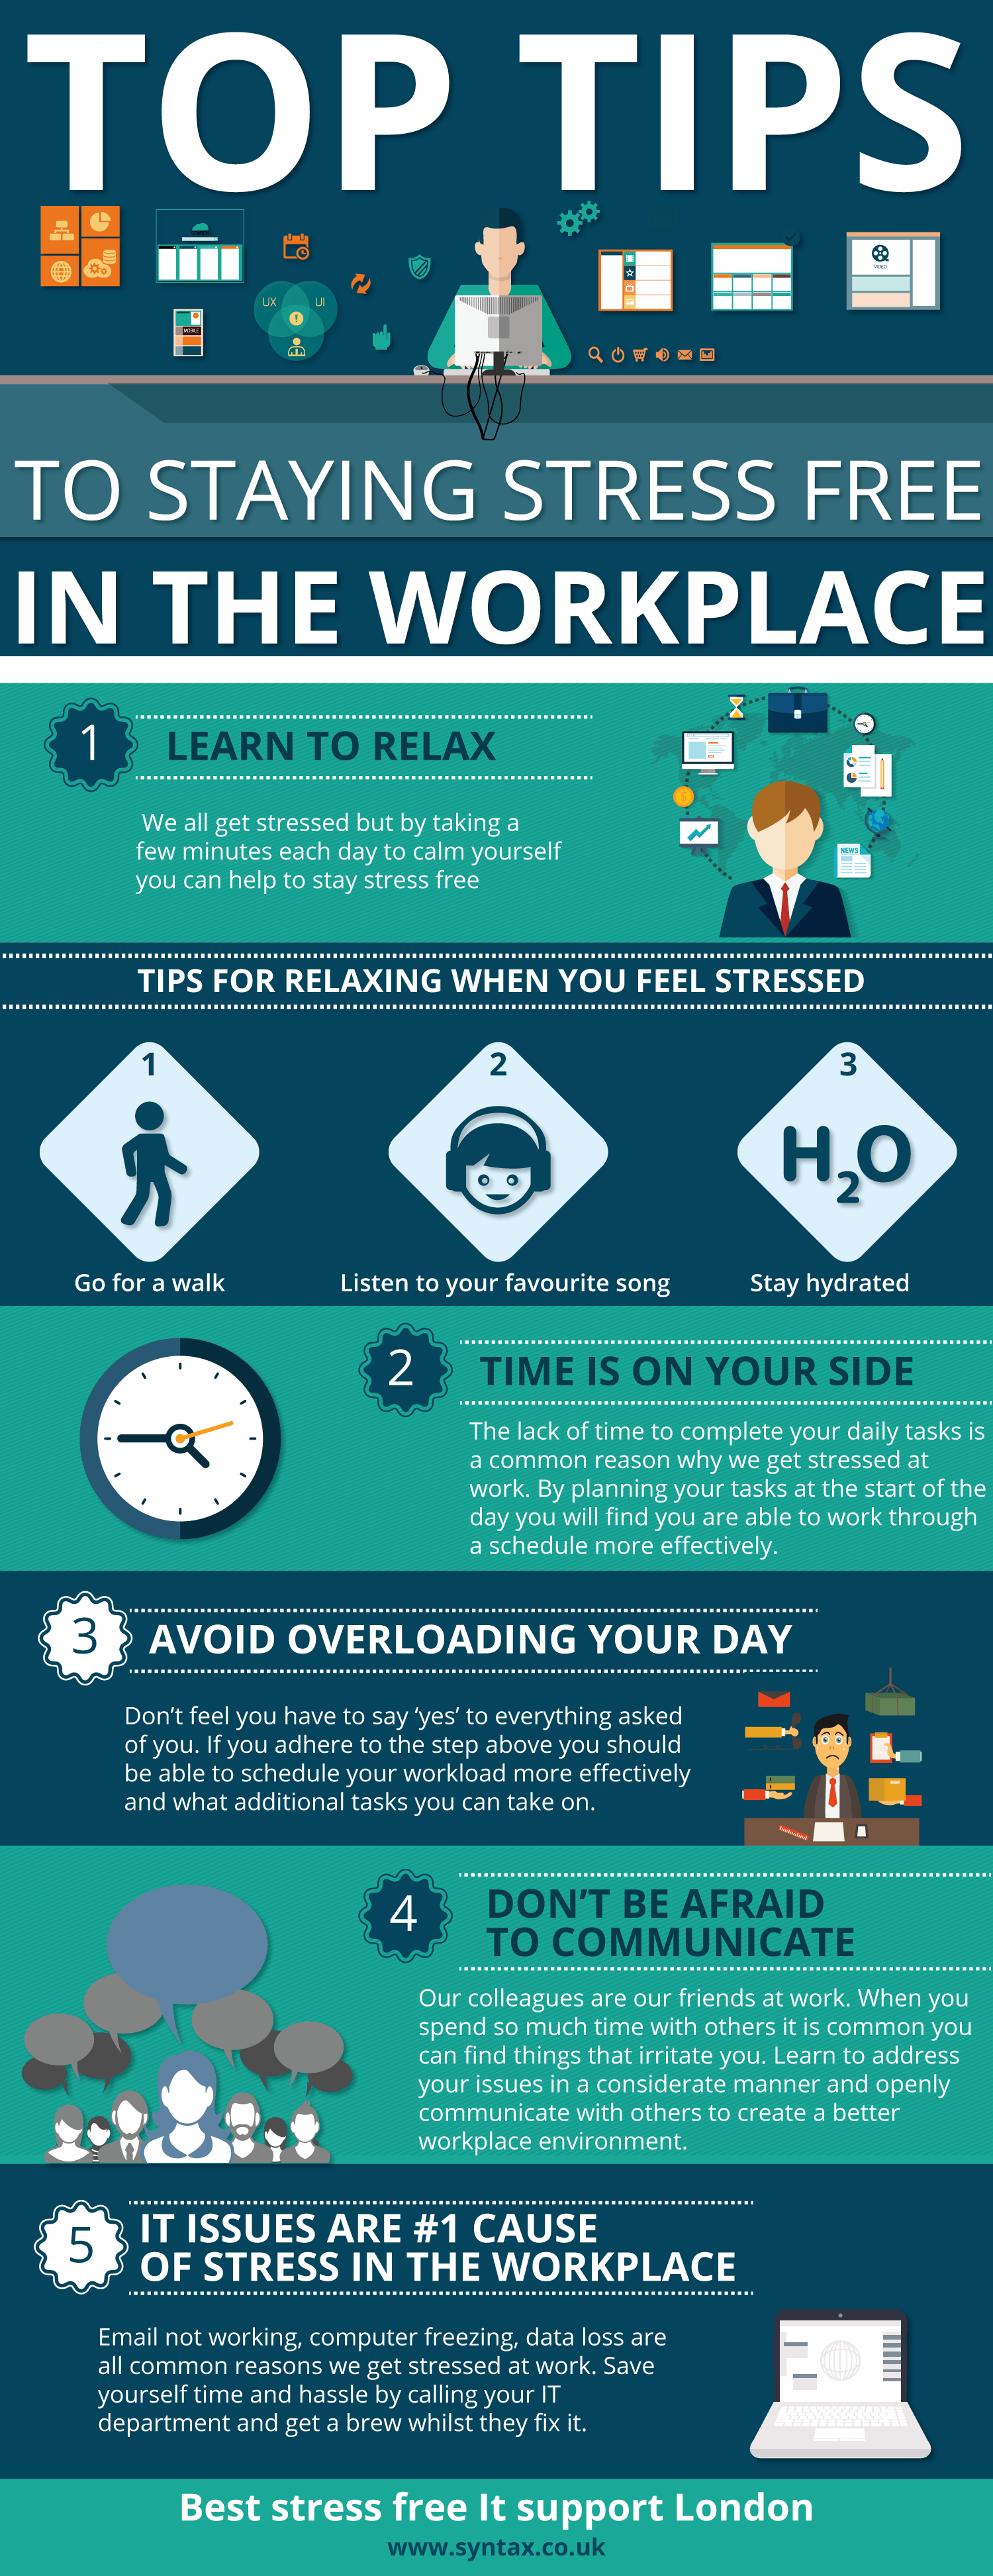 10 Tips for Stress-Free Travel